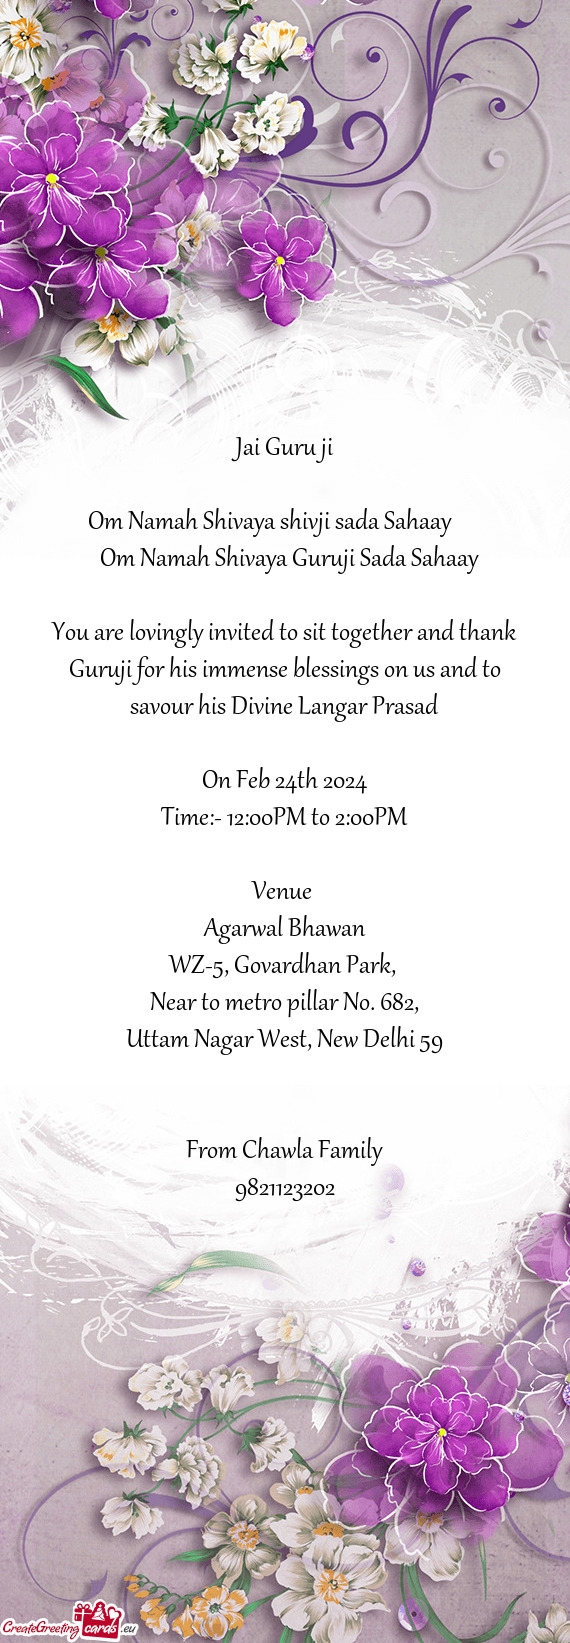 You are lovingly invited to sit together and thank Guruji for his immense blessings on us and to sav